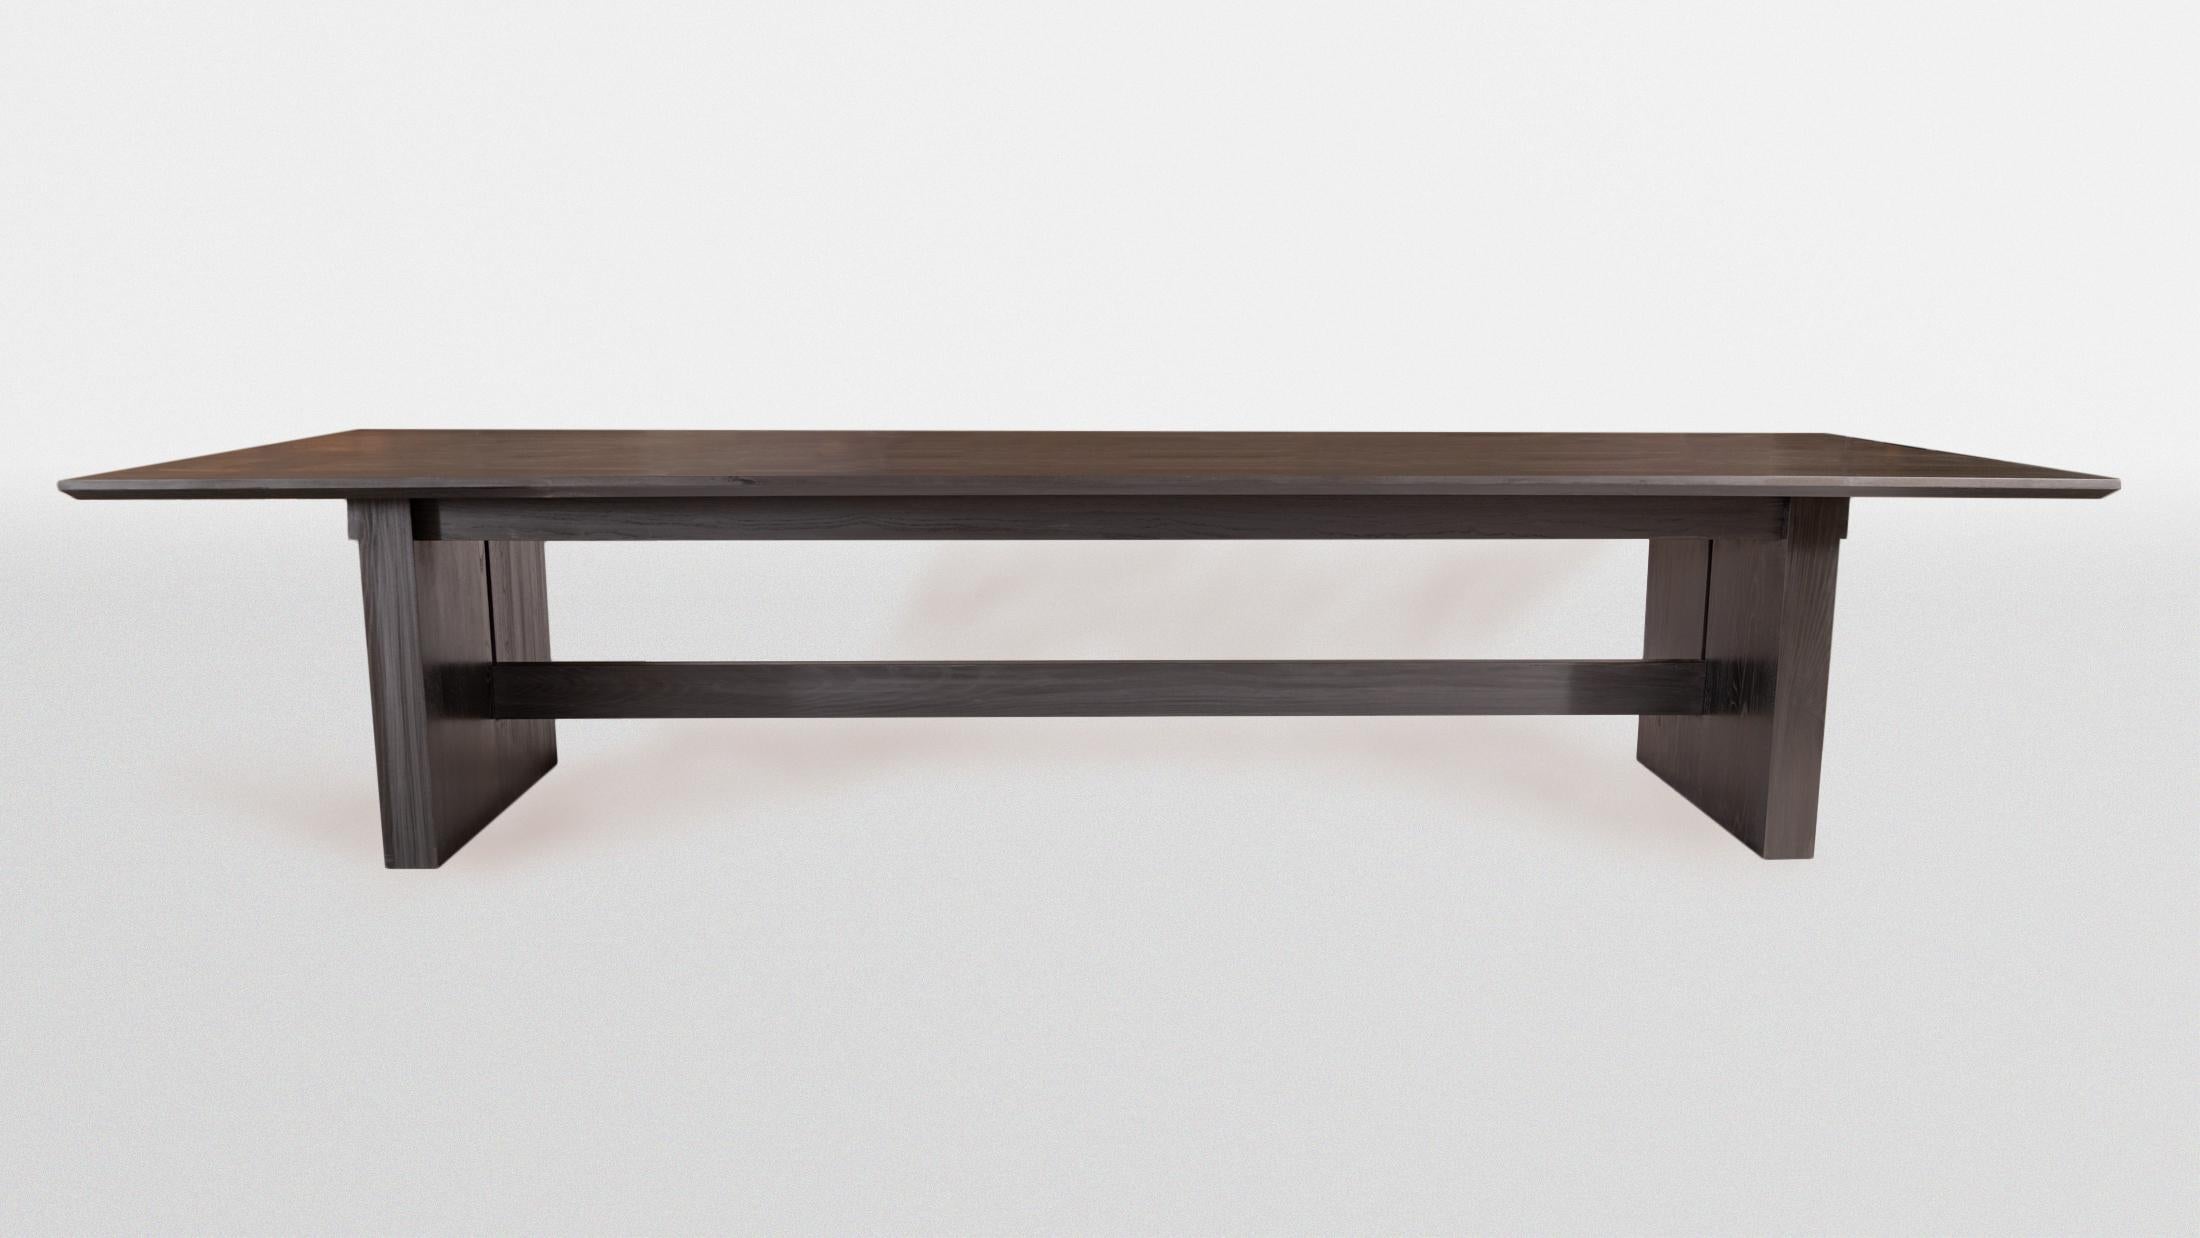 We love the way the grain shouts when you blacken Ash, so we modified our Magnolia Dining Table to highlight it. A mix of Modern and Japanese design, the Magnolia Conference Table features blackened-ash, a modern trestle-base and exposed joinery.